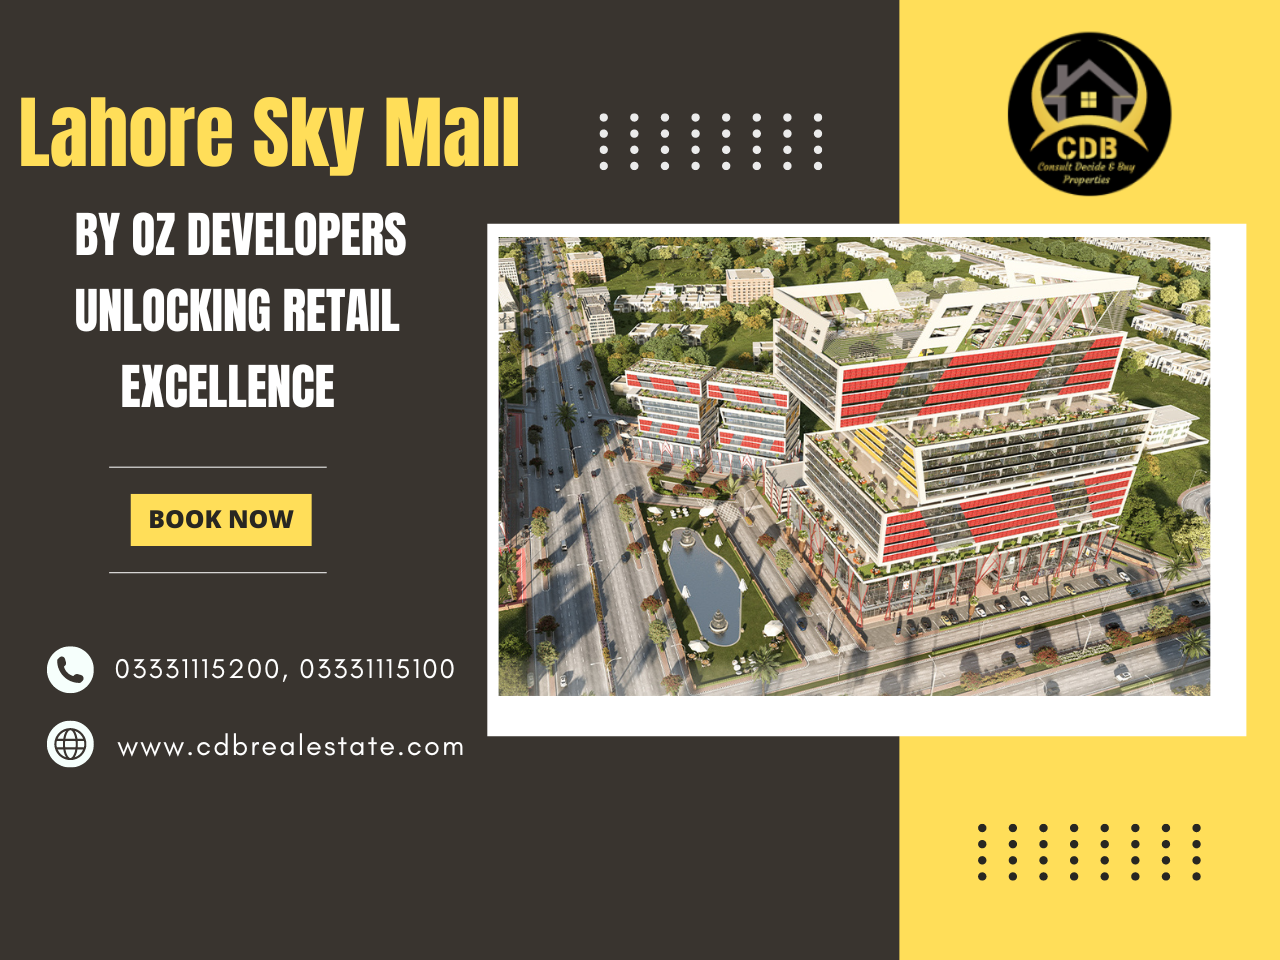 Lahore Sky Mall Mall by OZ Developers Unlocking Retail Excellence